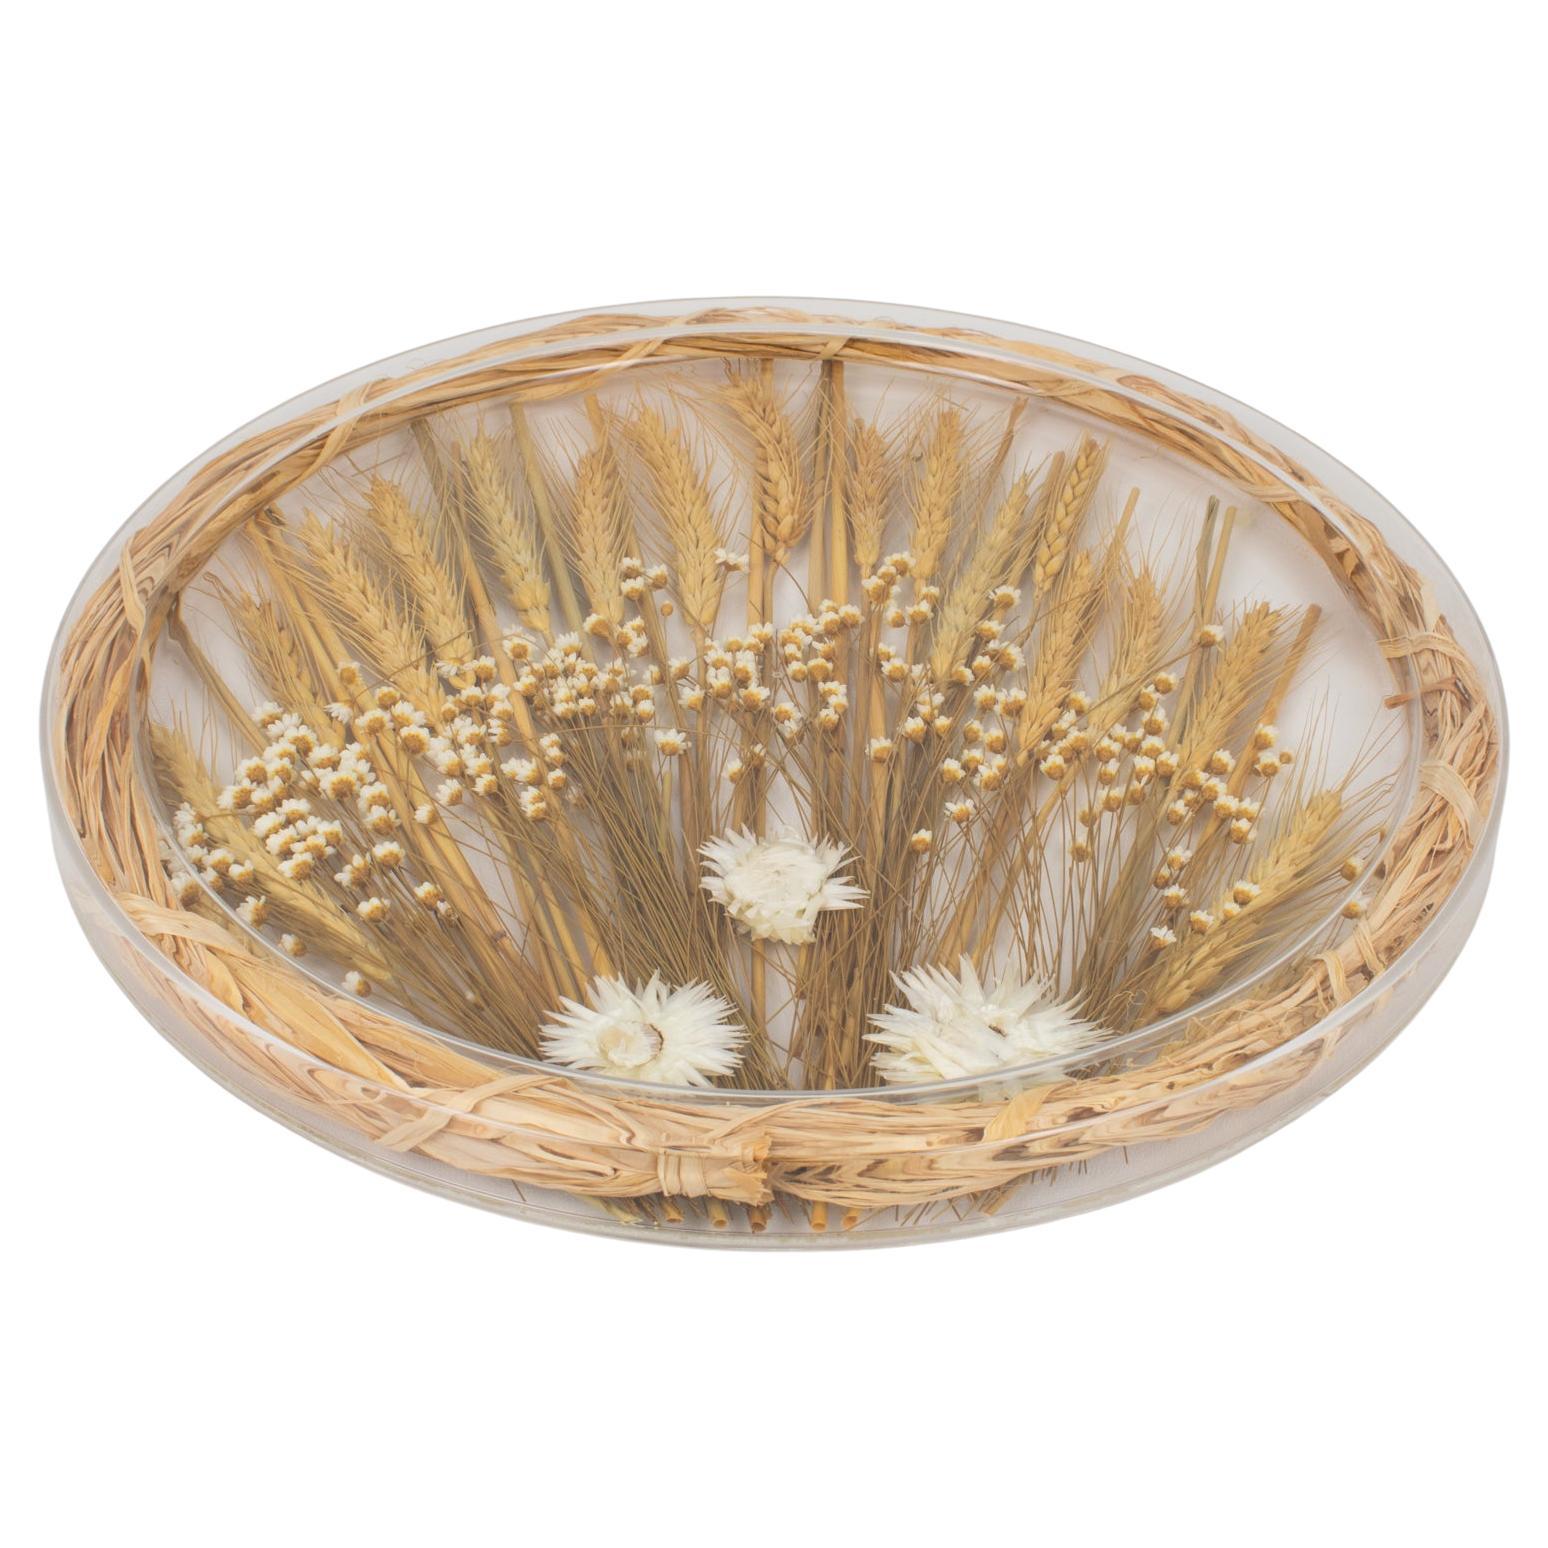 Alpac Creations Tray Board Platter Lucite, Wheat and Flowers, 1980s For Sale